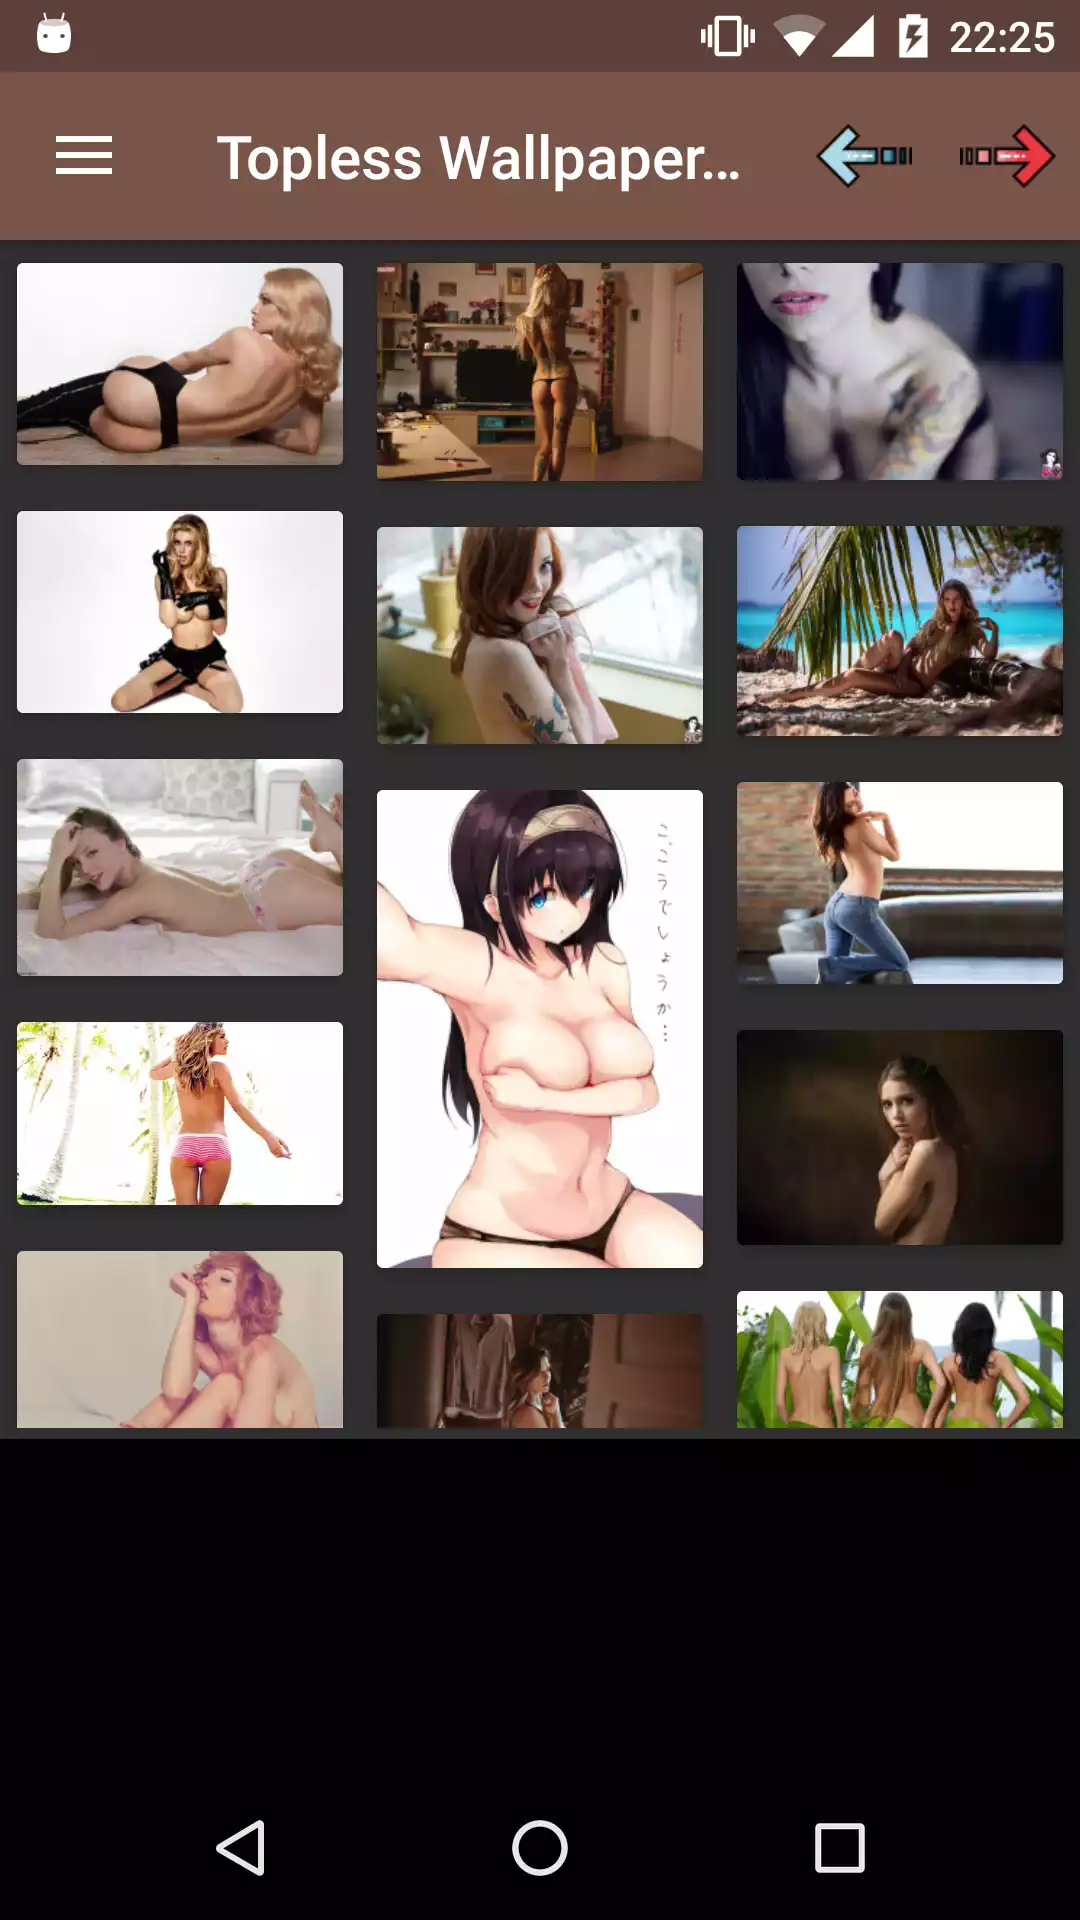 Topless backgrounds adult,henti,pornstars,erotic,app,photo,pic,wallpapers,aletta,apk,sexy,phone,pornstar,anime,ocean,hentai,android,backgrounds,gallery,porn,teen,kristinf,galleries